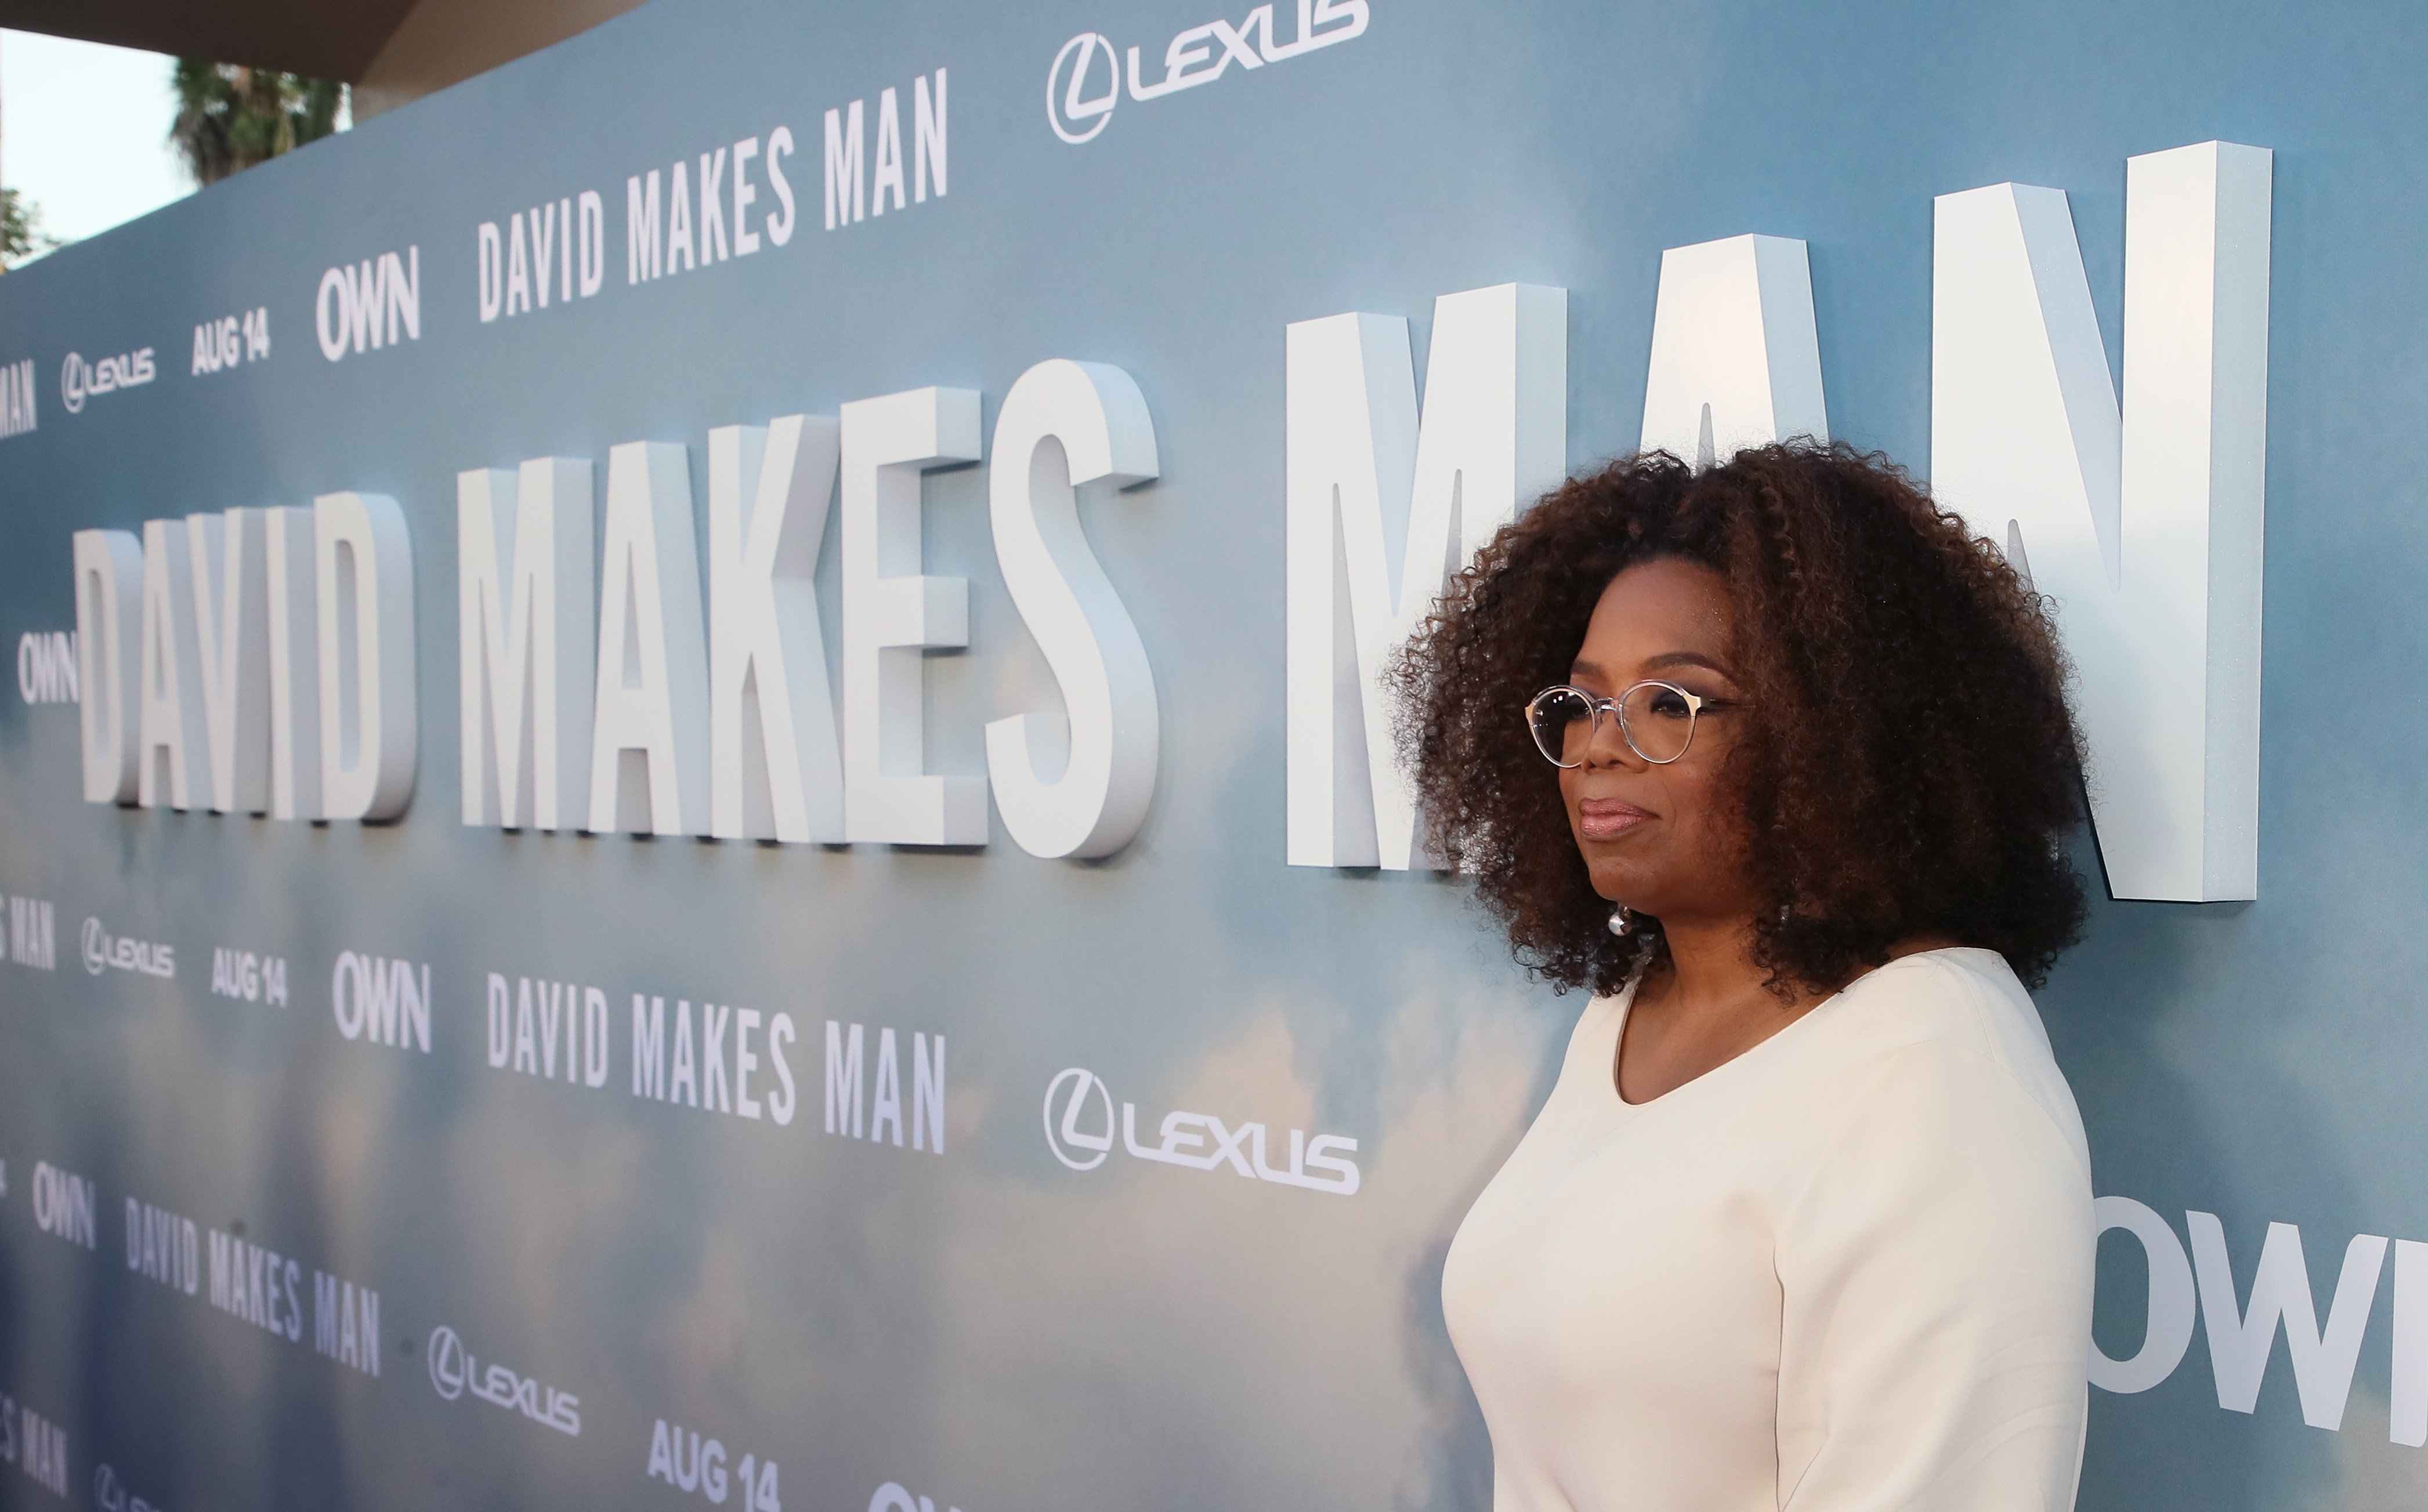 Oprah Winfrey attends the premiere of OWN's "David Makes Man" at NeueHouse Hollywood on August 06, 2019. | Photo: GettyImages